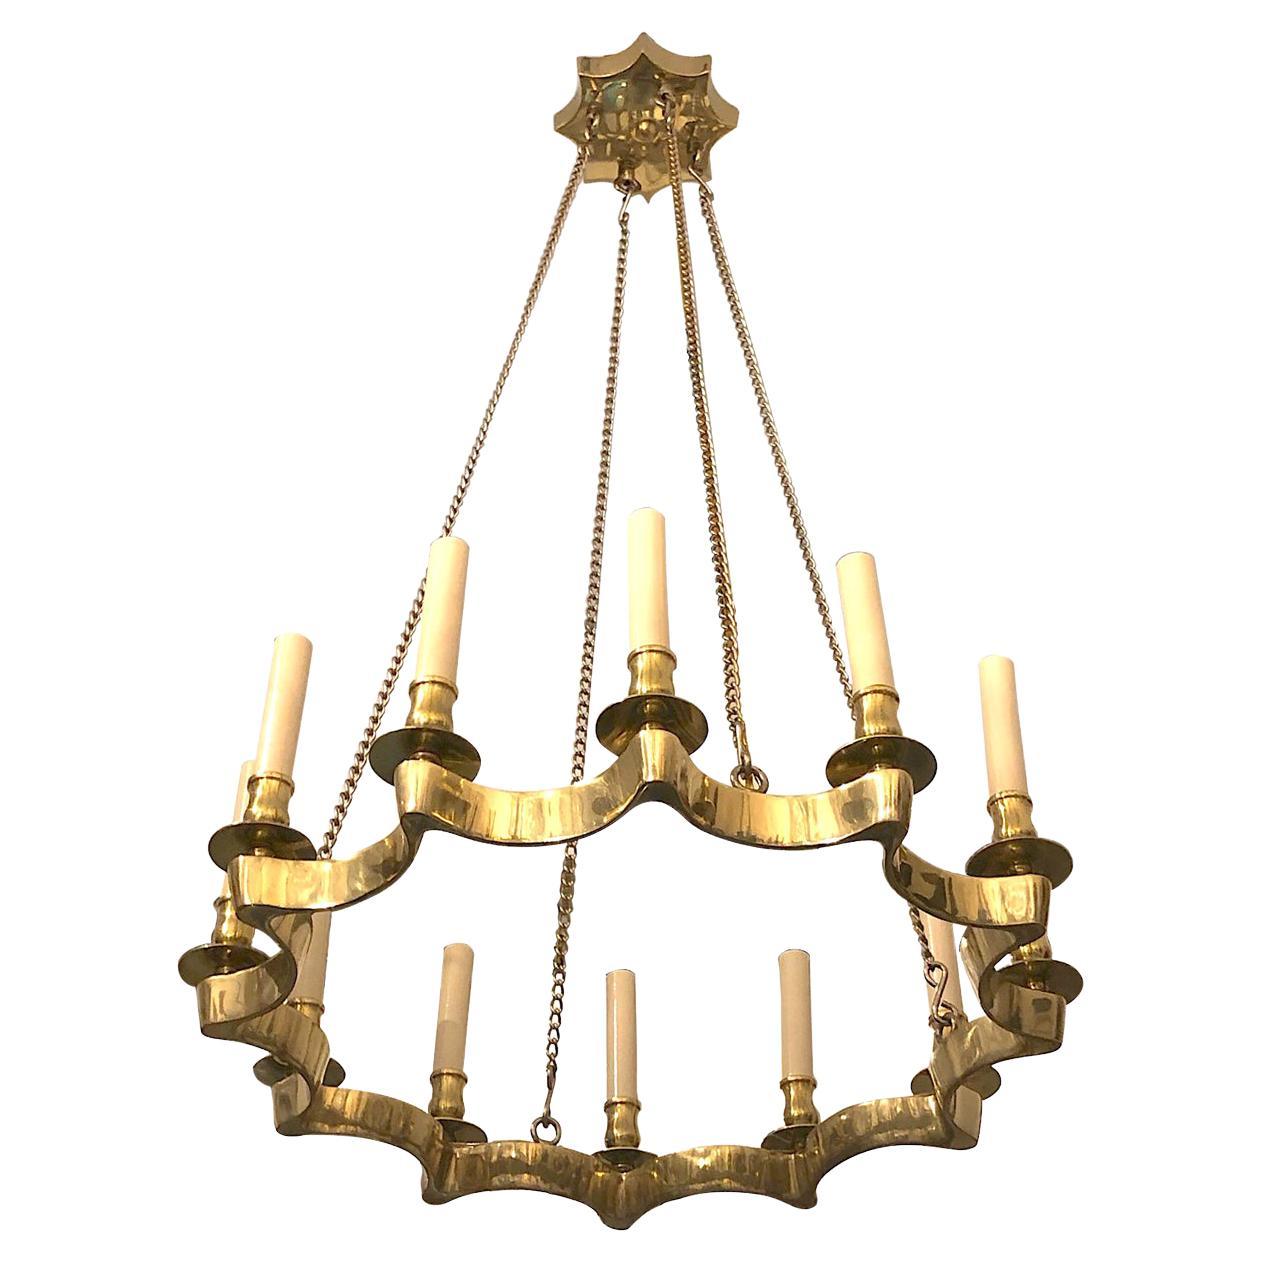 Set of 3 Moderne Star Shaped Gilt Chandeliers, Sold Individually